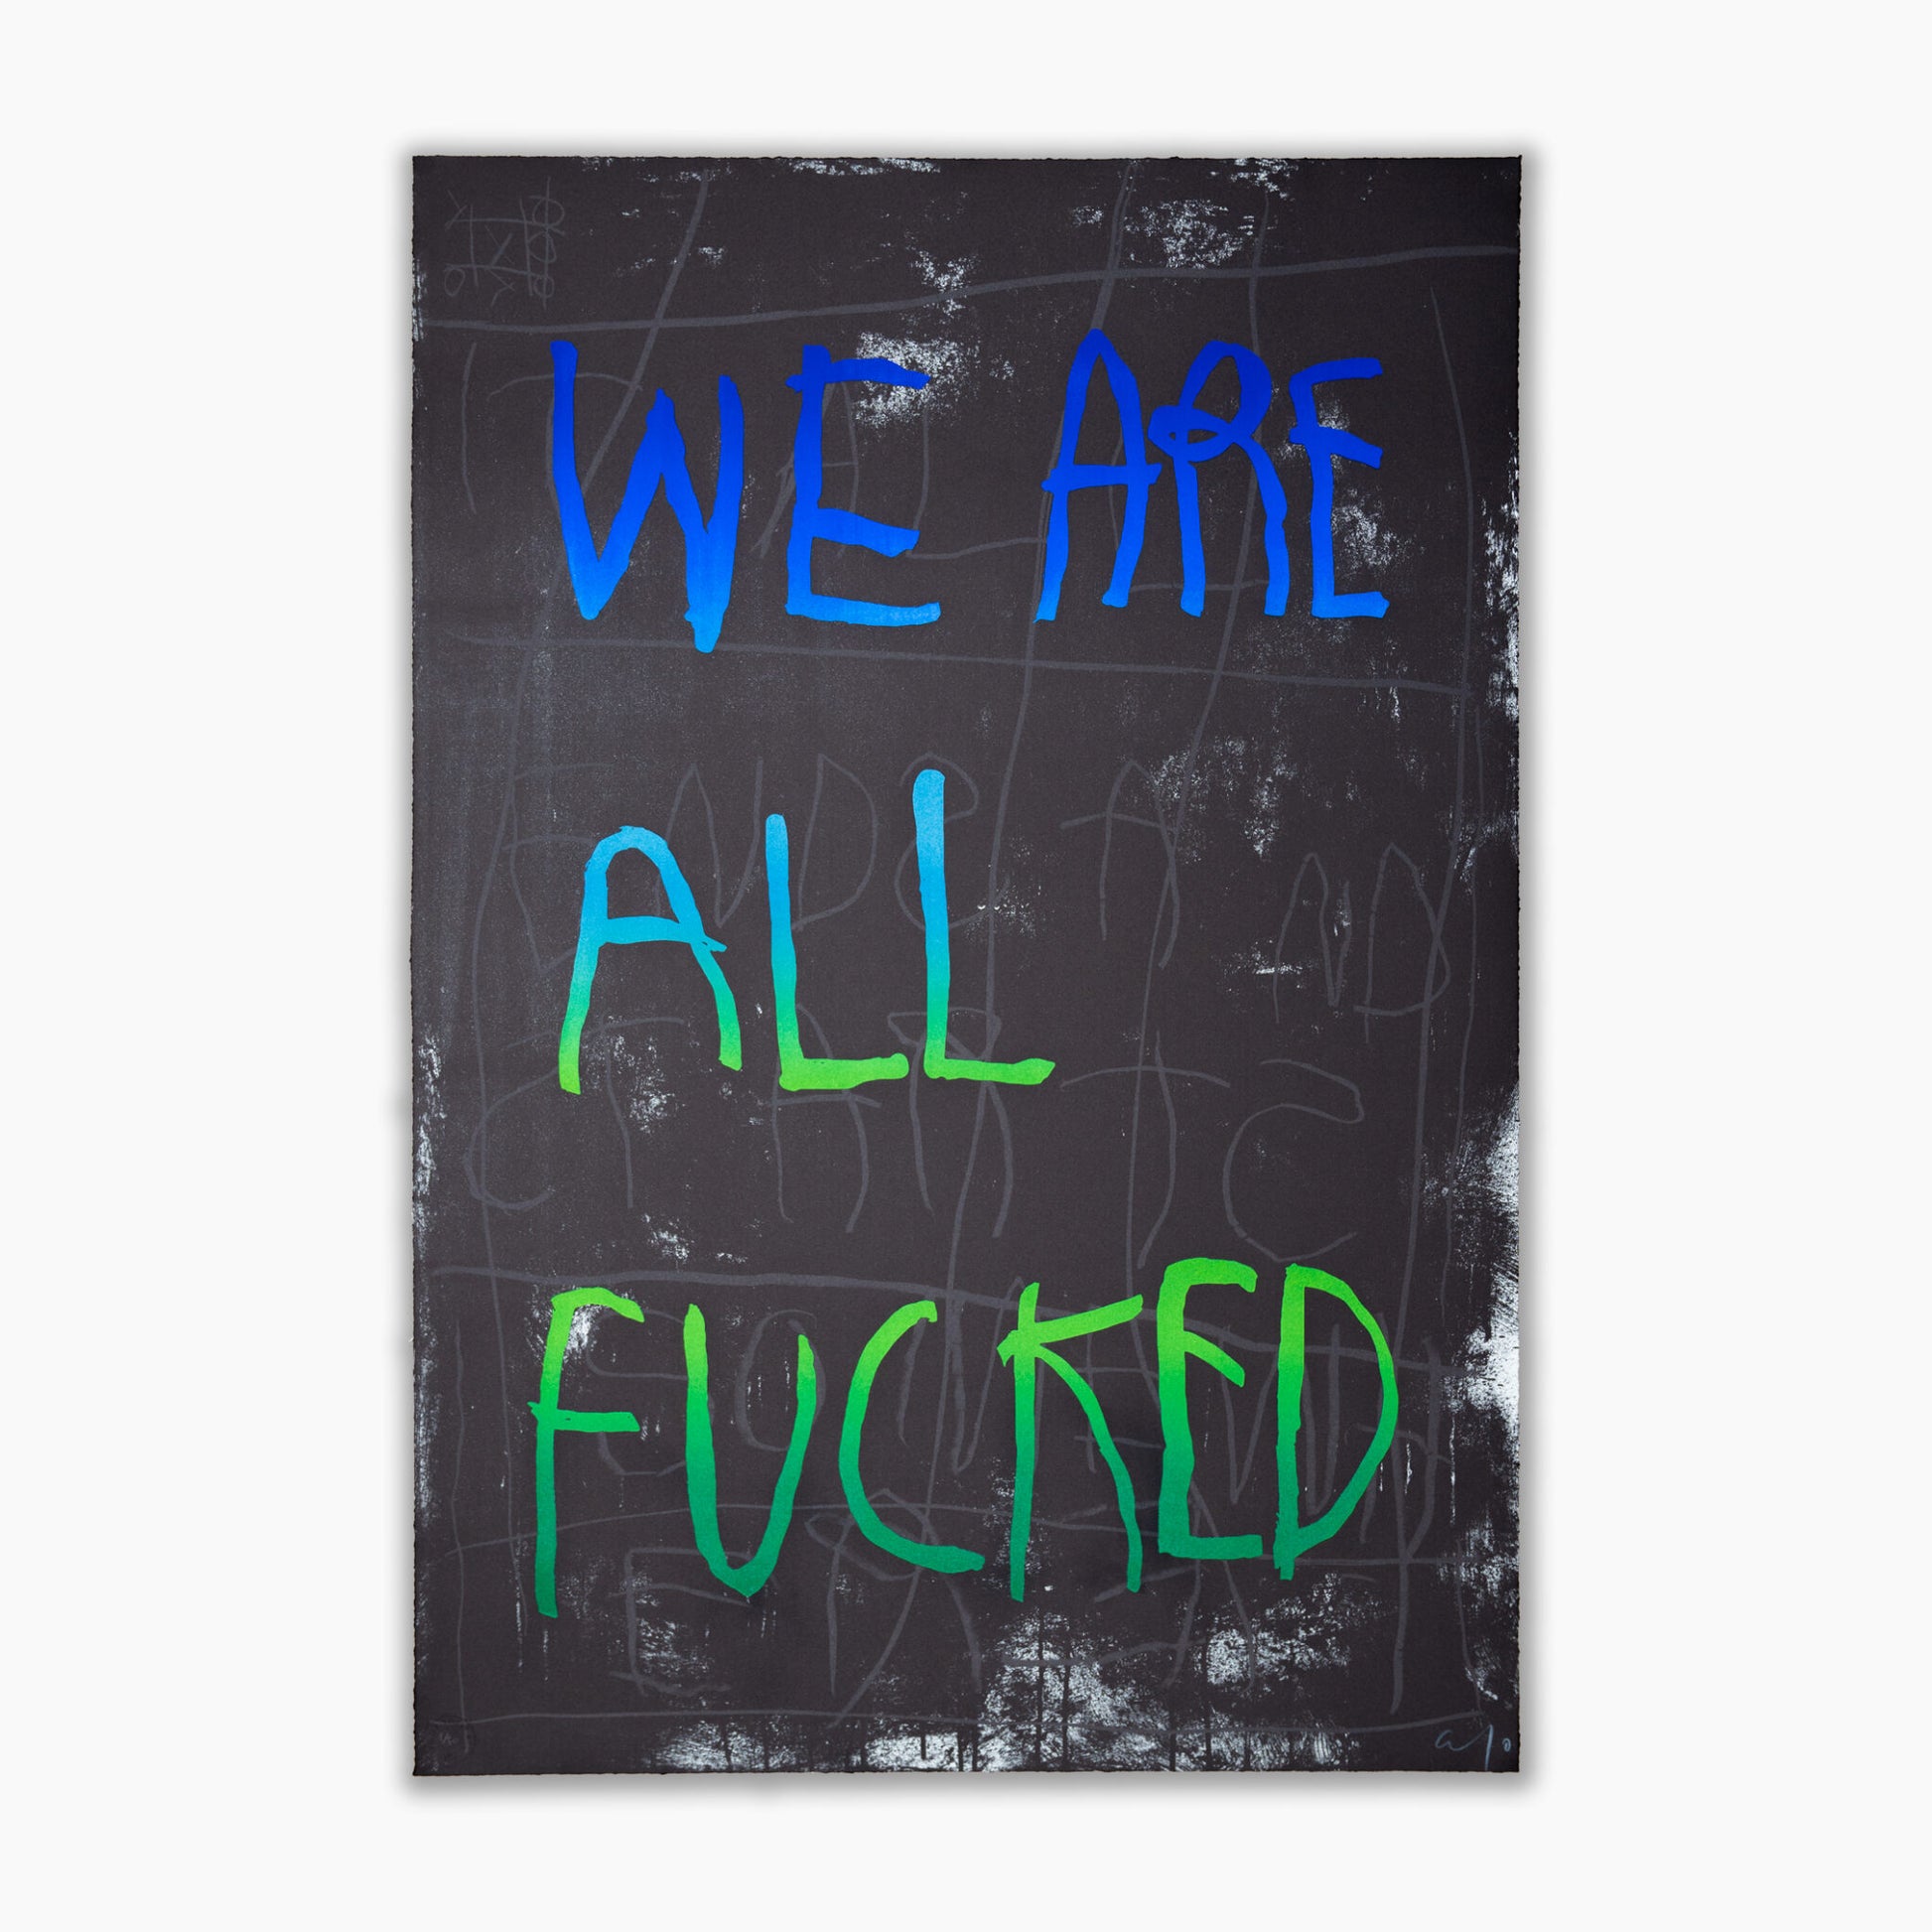 CB Hoyo We Are All F*cked (Blue and Green), 2021 5-colors lithograph, 3 printing passes with Marinoni lithographic press, hand cut on BFK Rives 300 g 45.67 in. x 29.53 in Edition of 50  Hand signed by the artist, numbered and stamped by the publishing house, Print Them All. Accompanied by Certificate of Authenticity. 